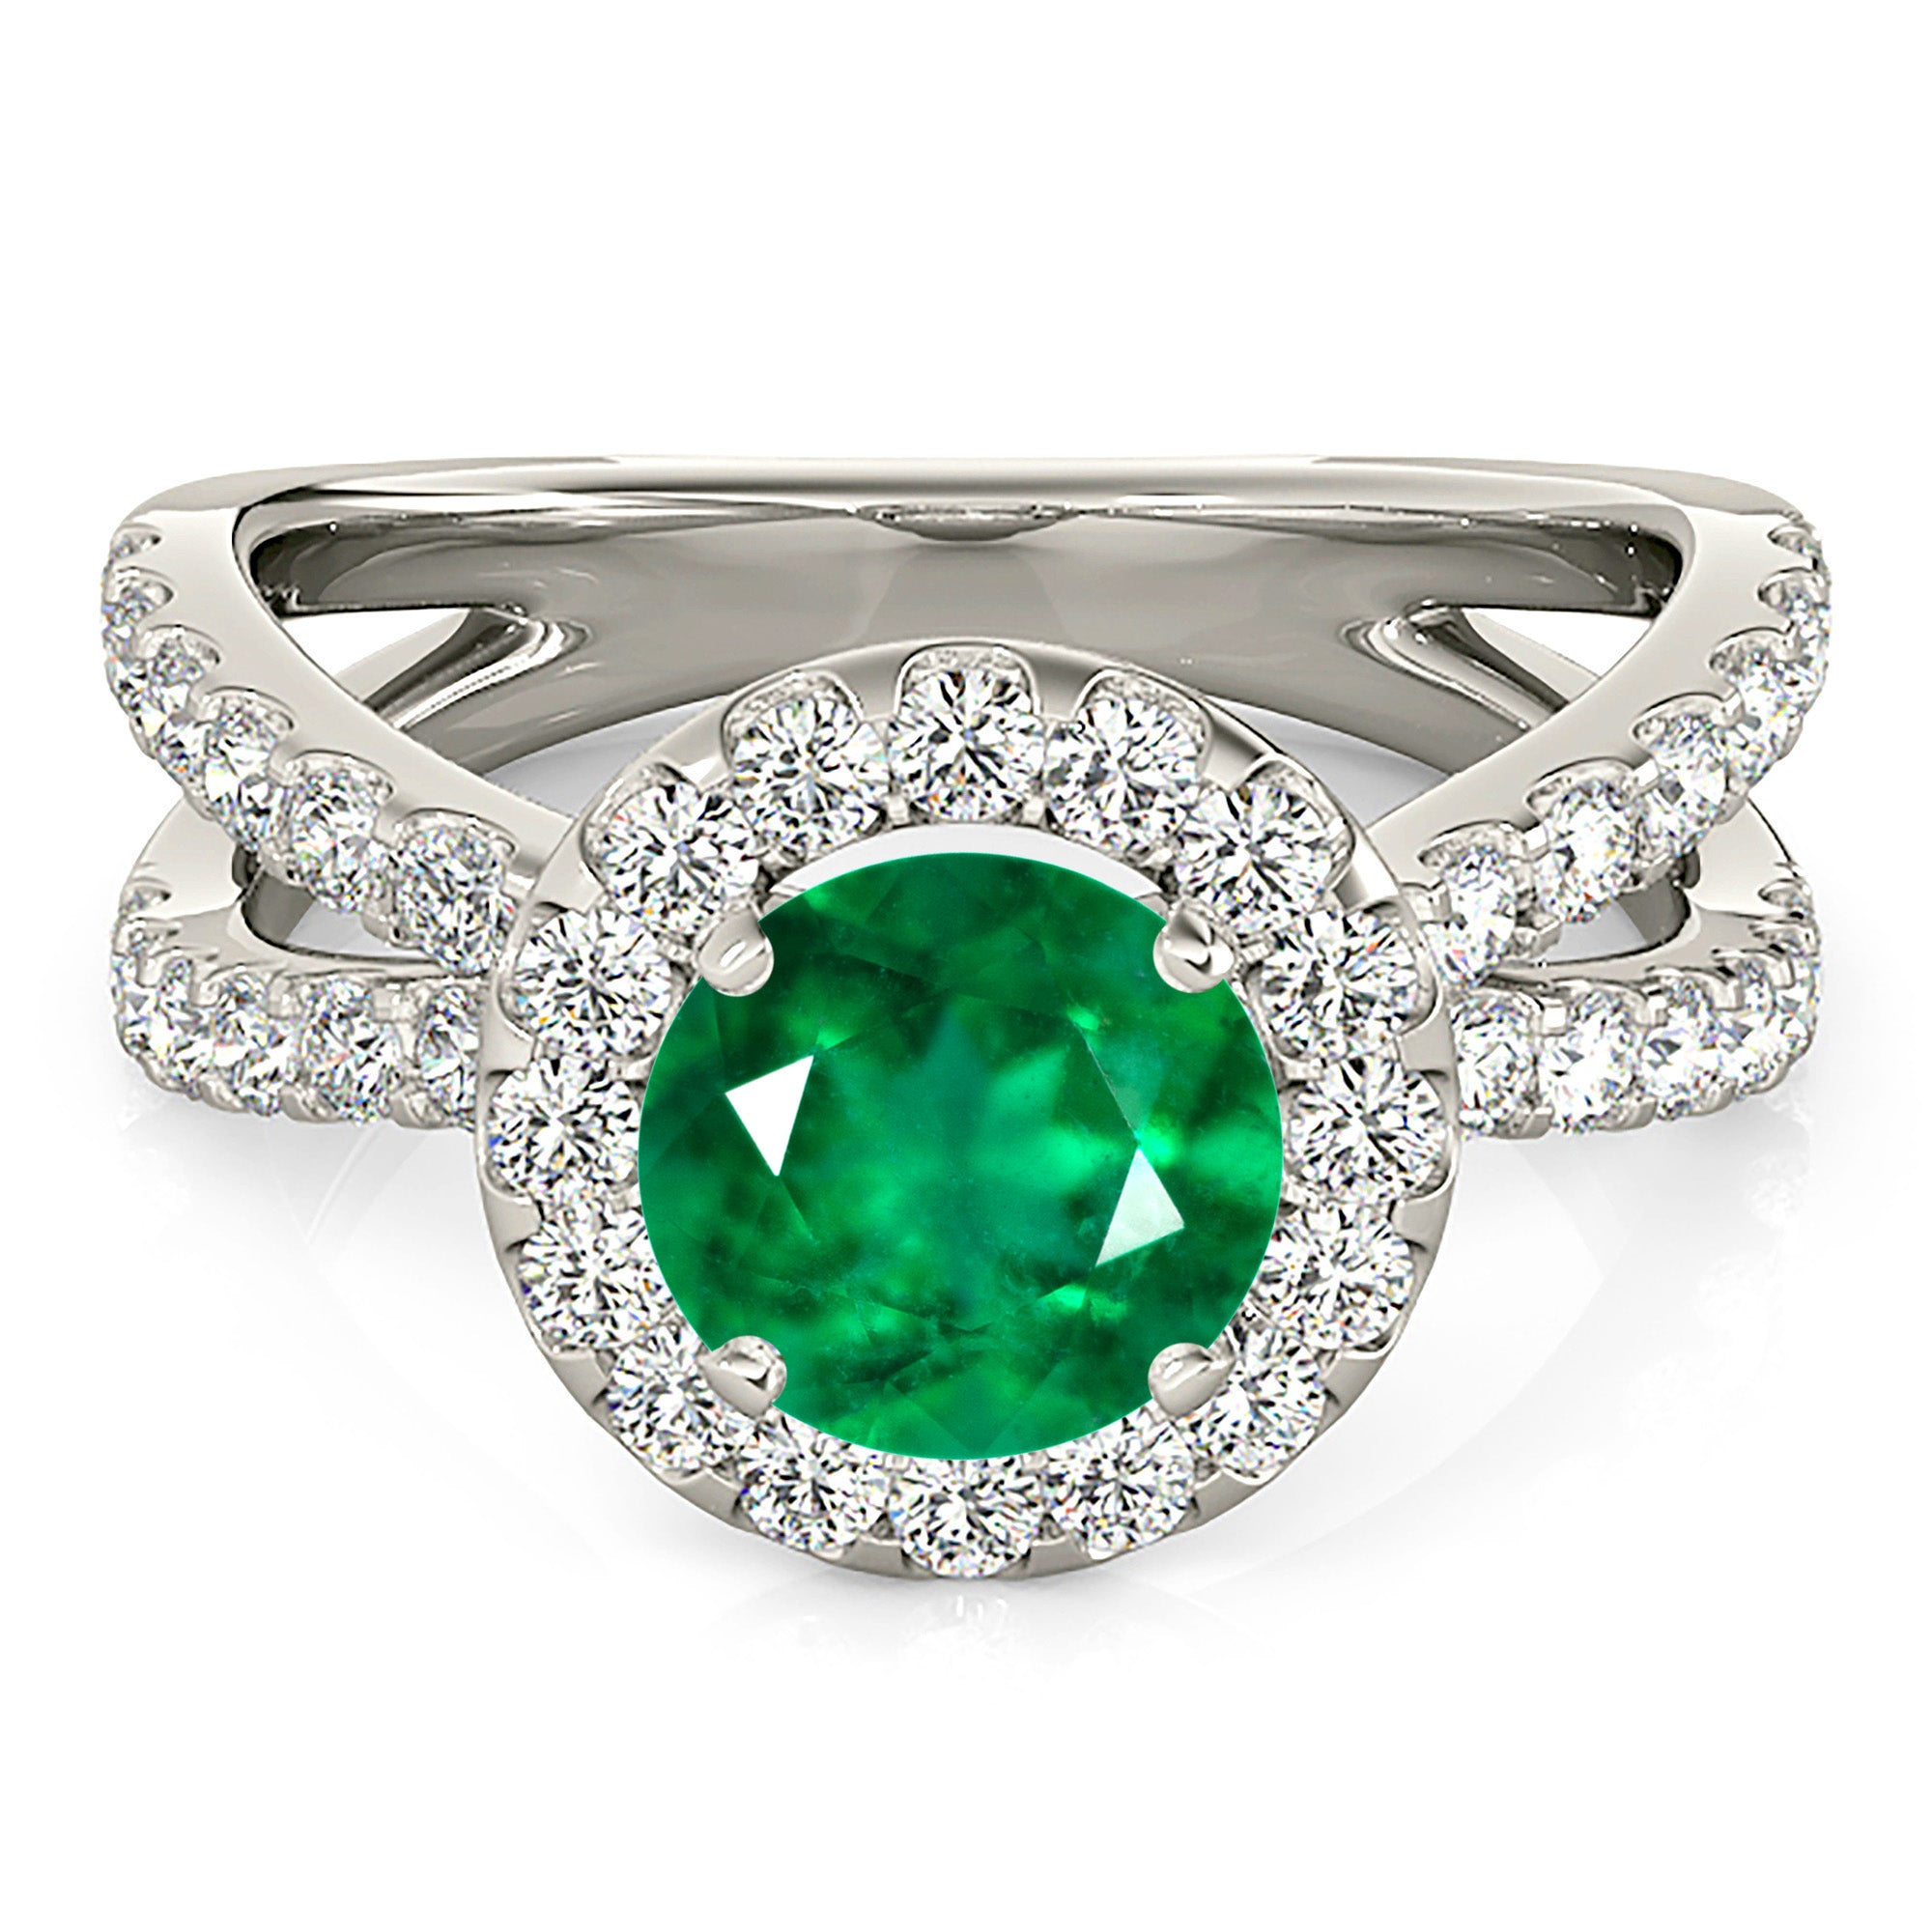 1.75 ct. Genuine Emerald Halo Criss Cross Ring with 0.90 ctw. Side Diamonds-in 14K/18K White, Yellow, Rose Gold and Platinum - Christmas Jewelry Gift -VIRABYANI